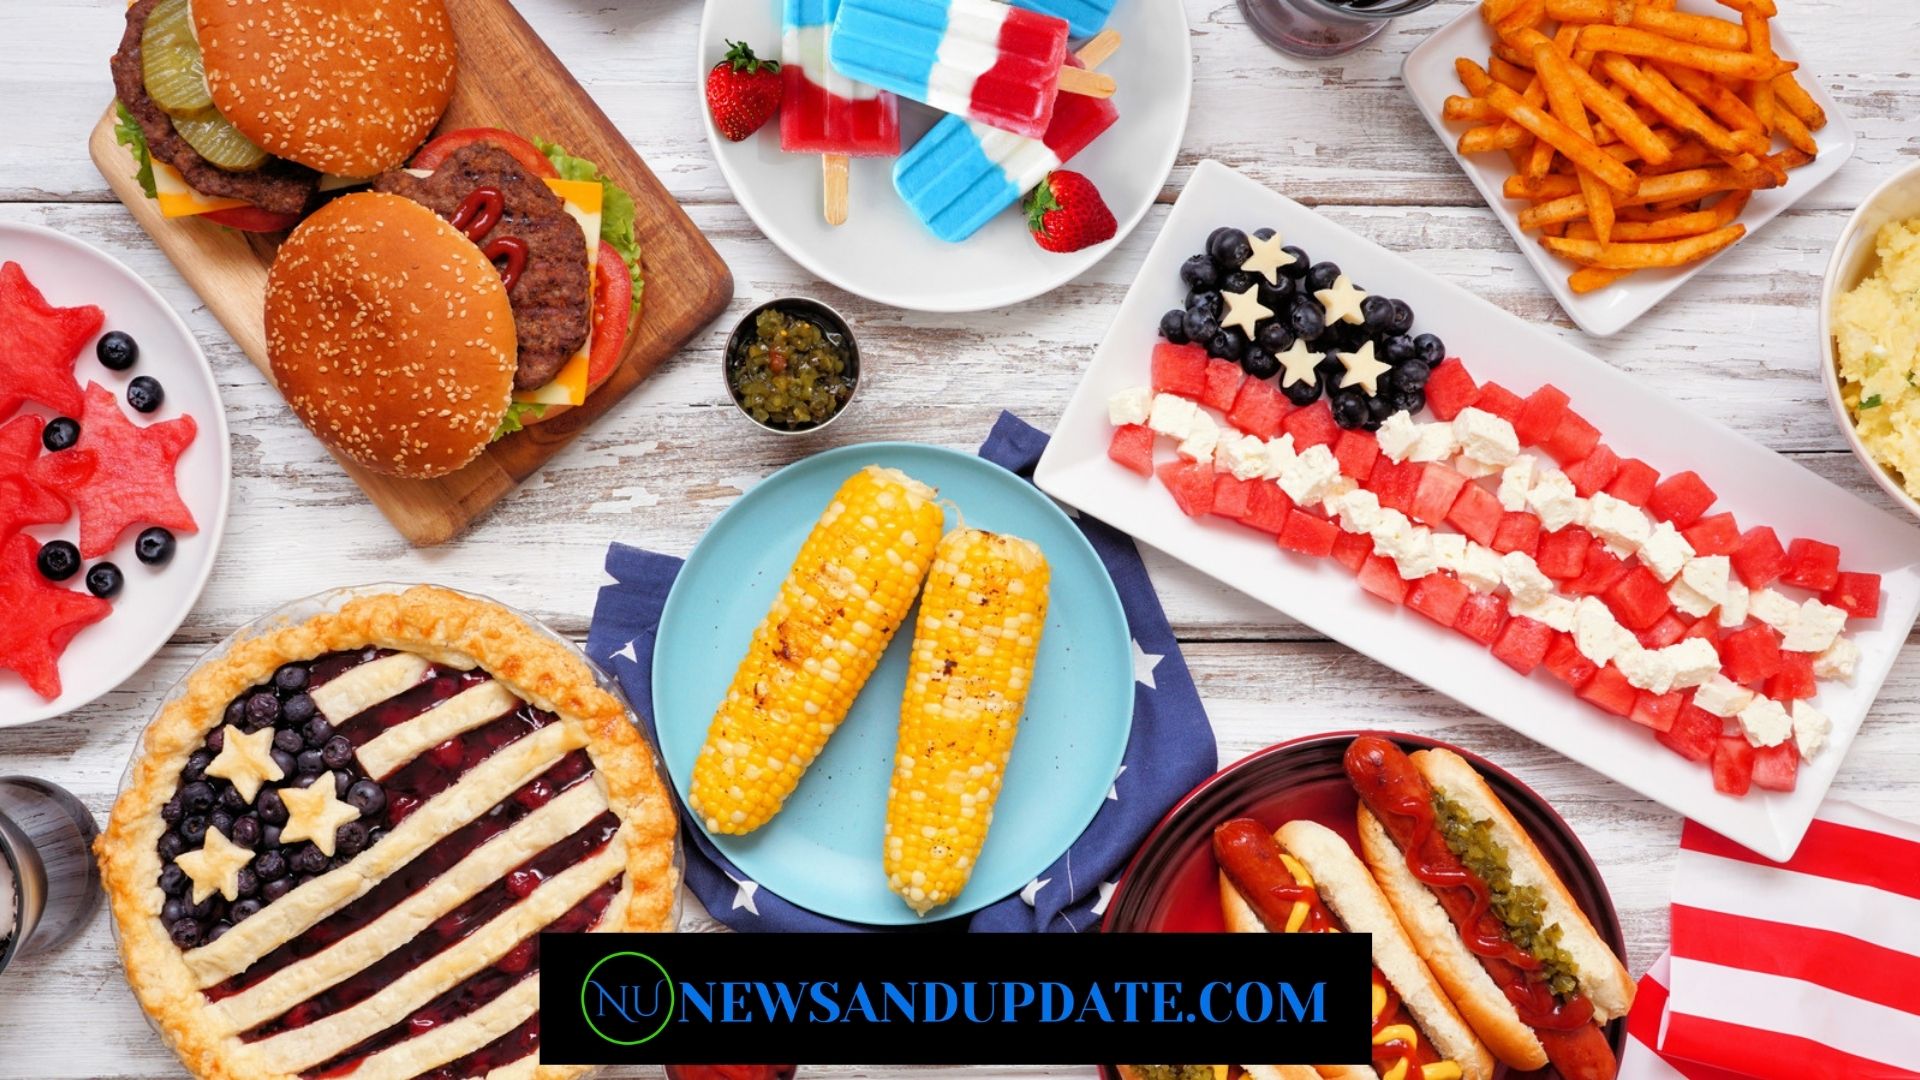 Restaurant Freebies And Offers For The 4th Of July - Get Free & Cheap Food